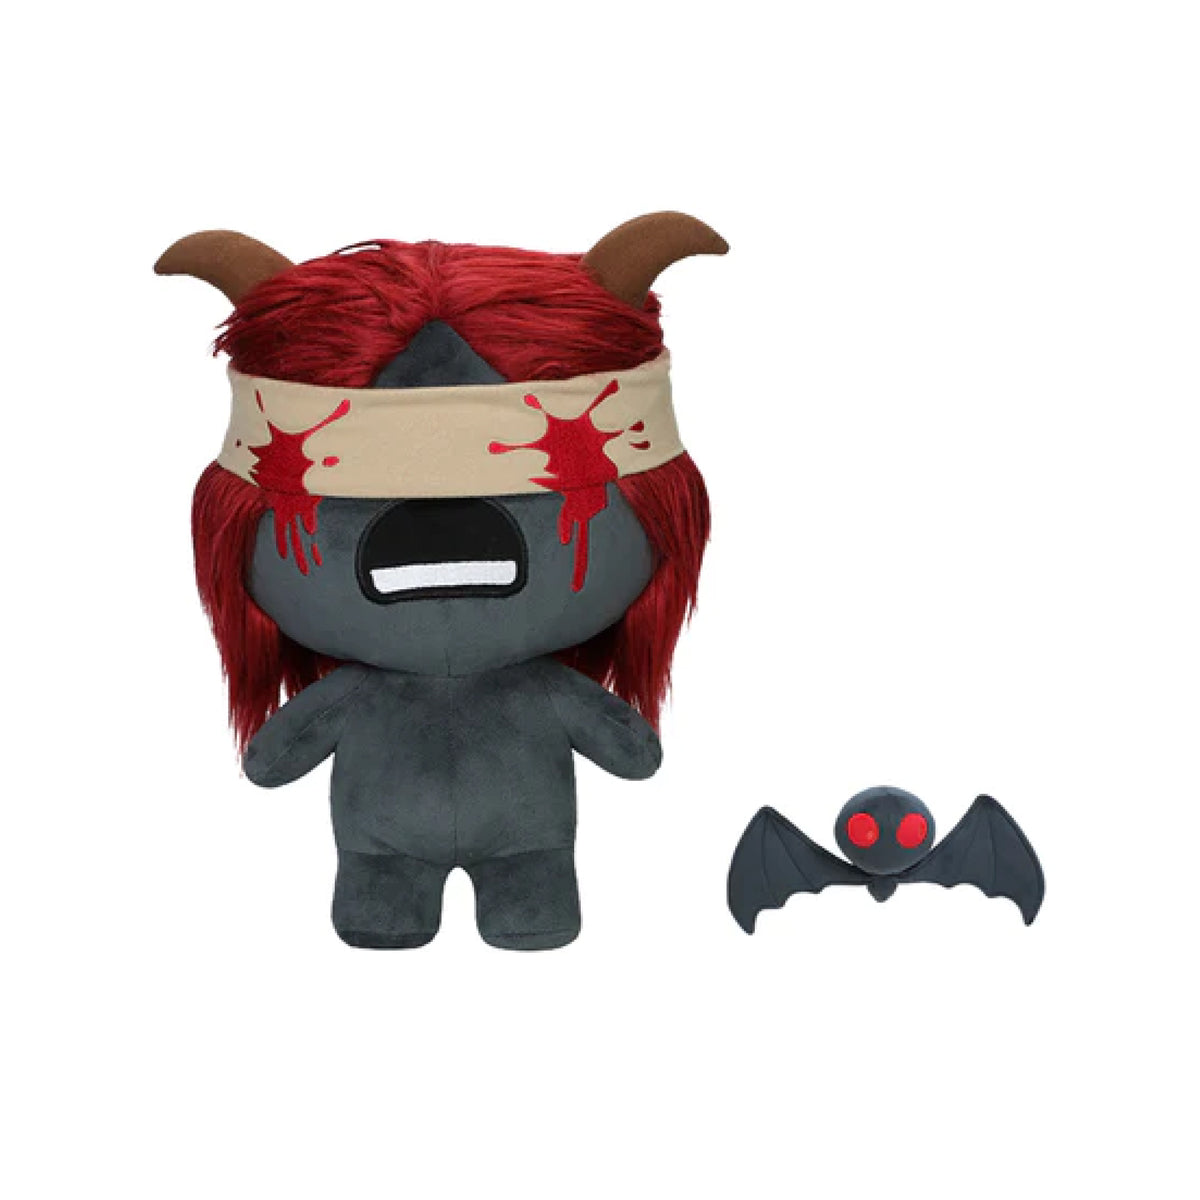 The Binding of Isaac Lilith Plush